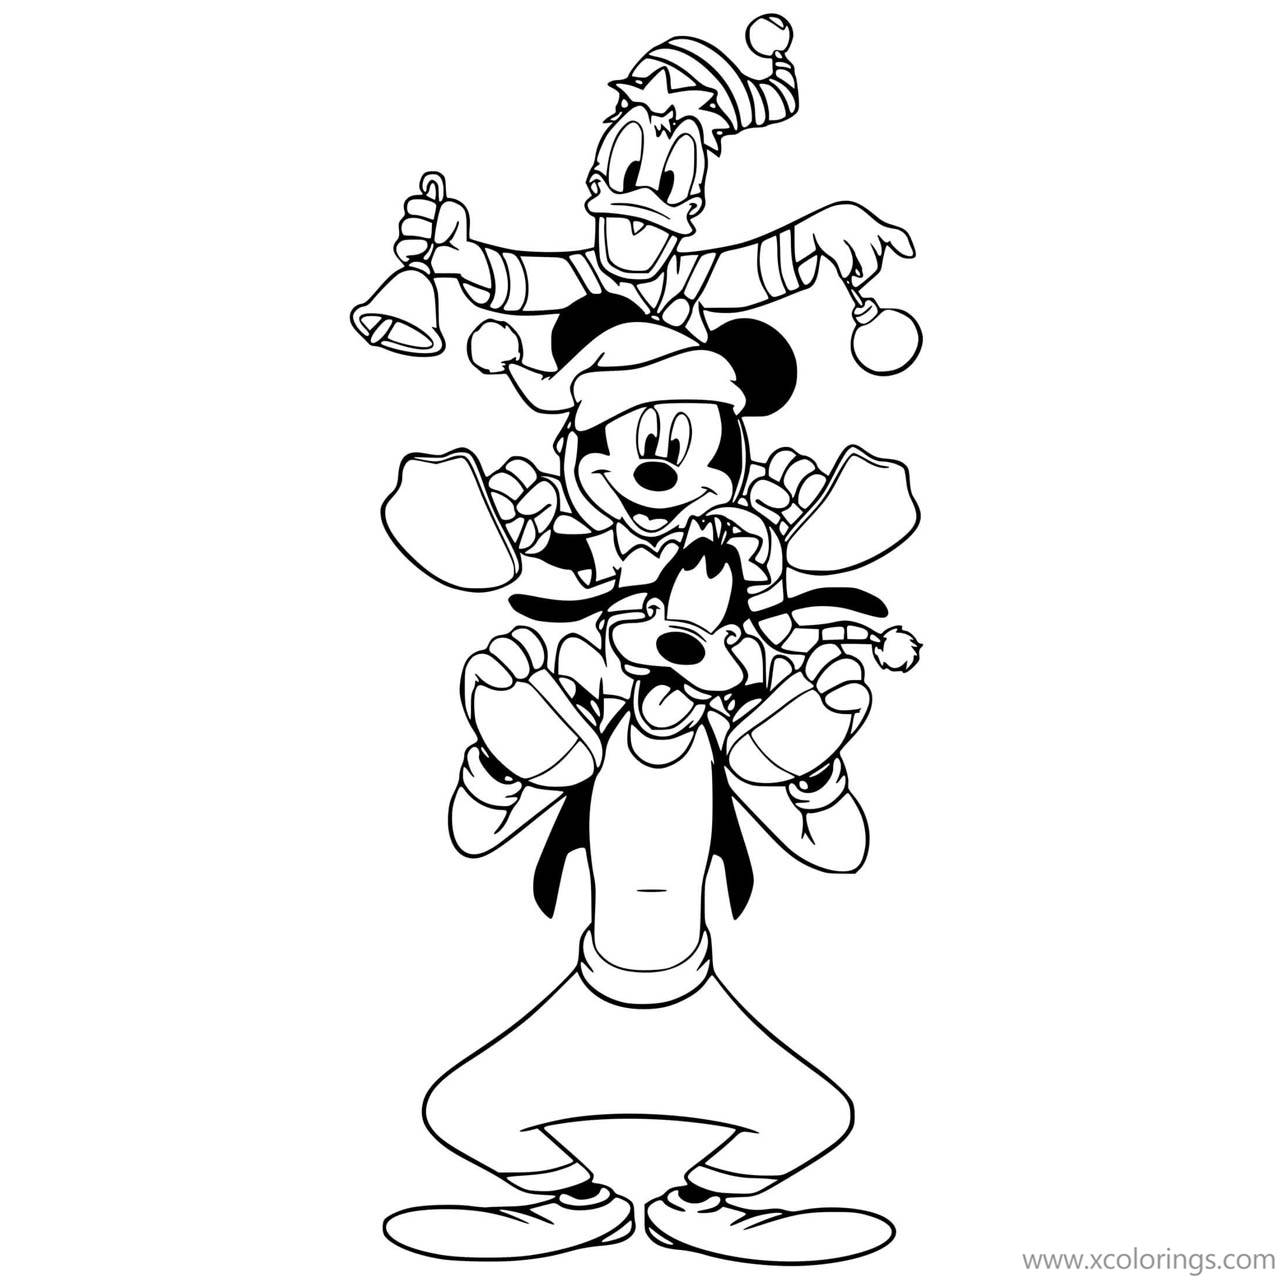 Free Mickey Mouse Christmas Coloring Pages with Goofy and Donald printable